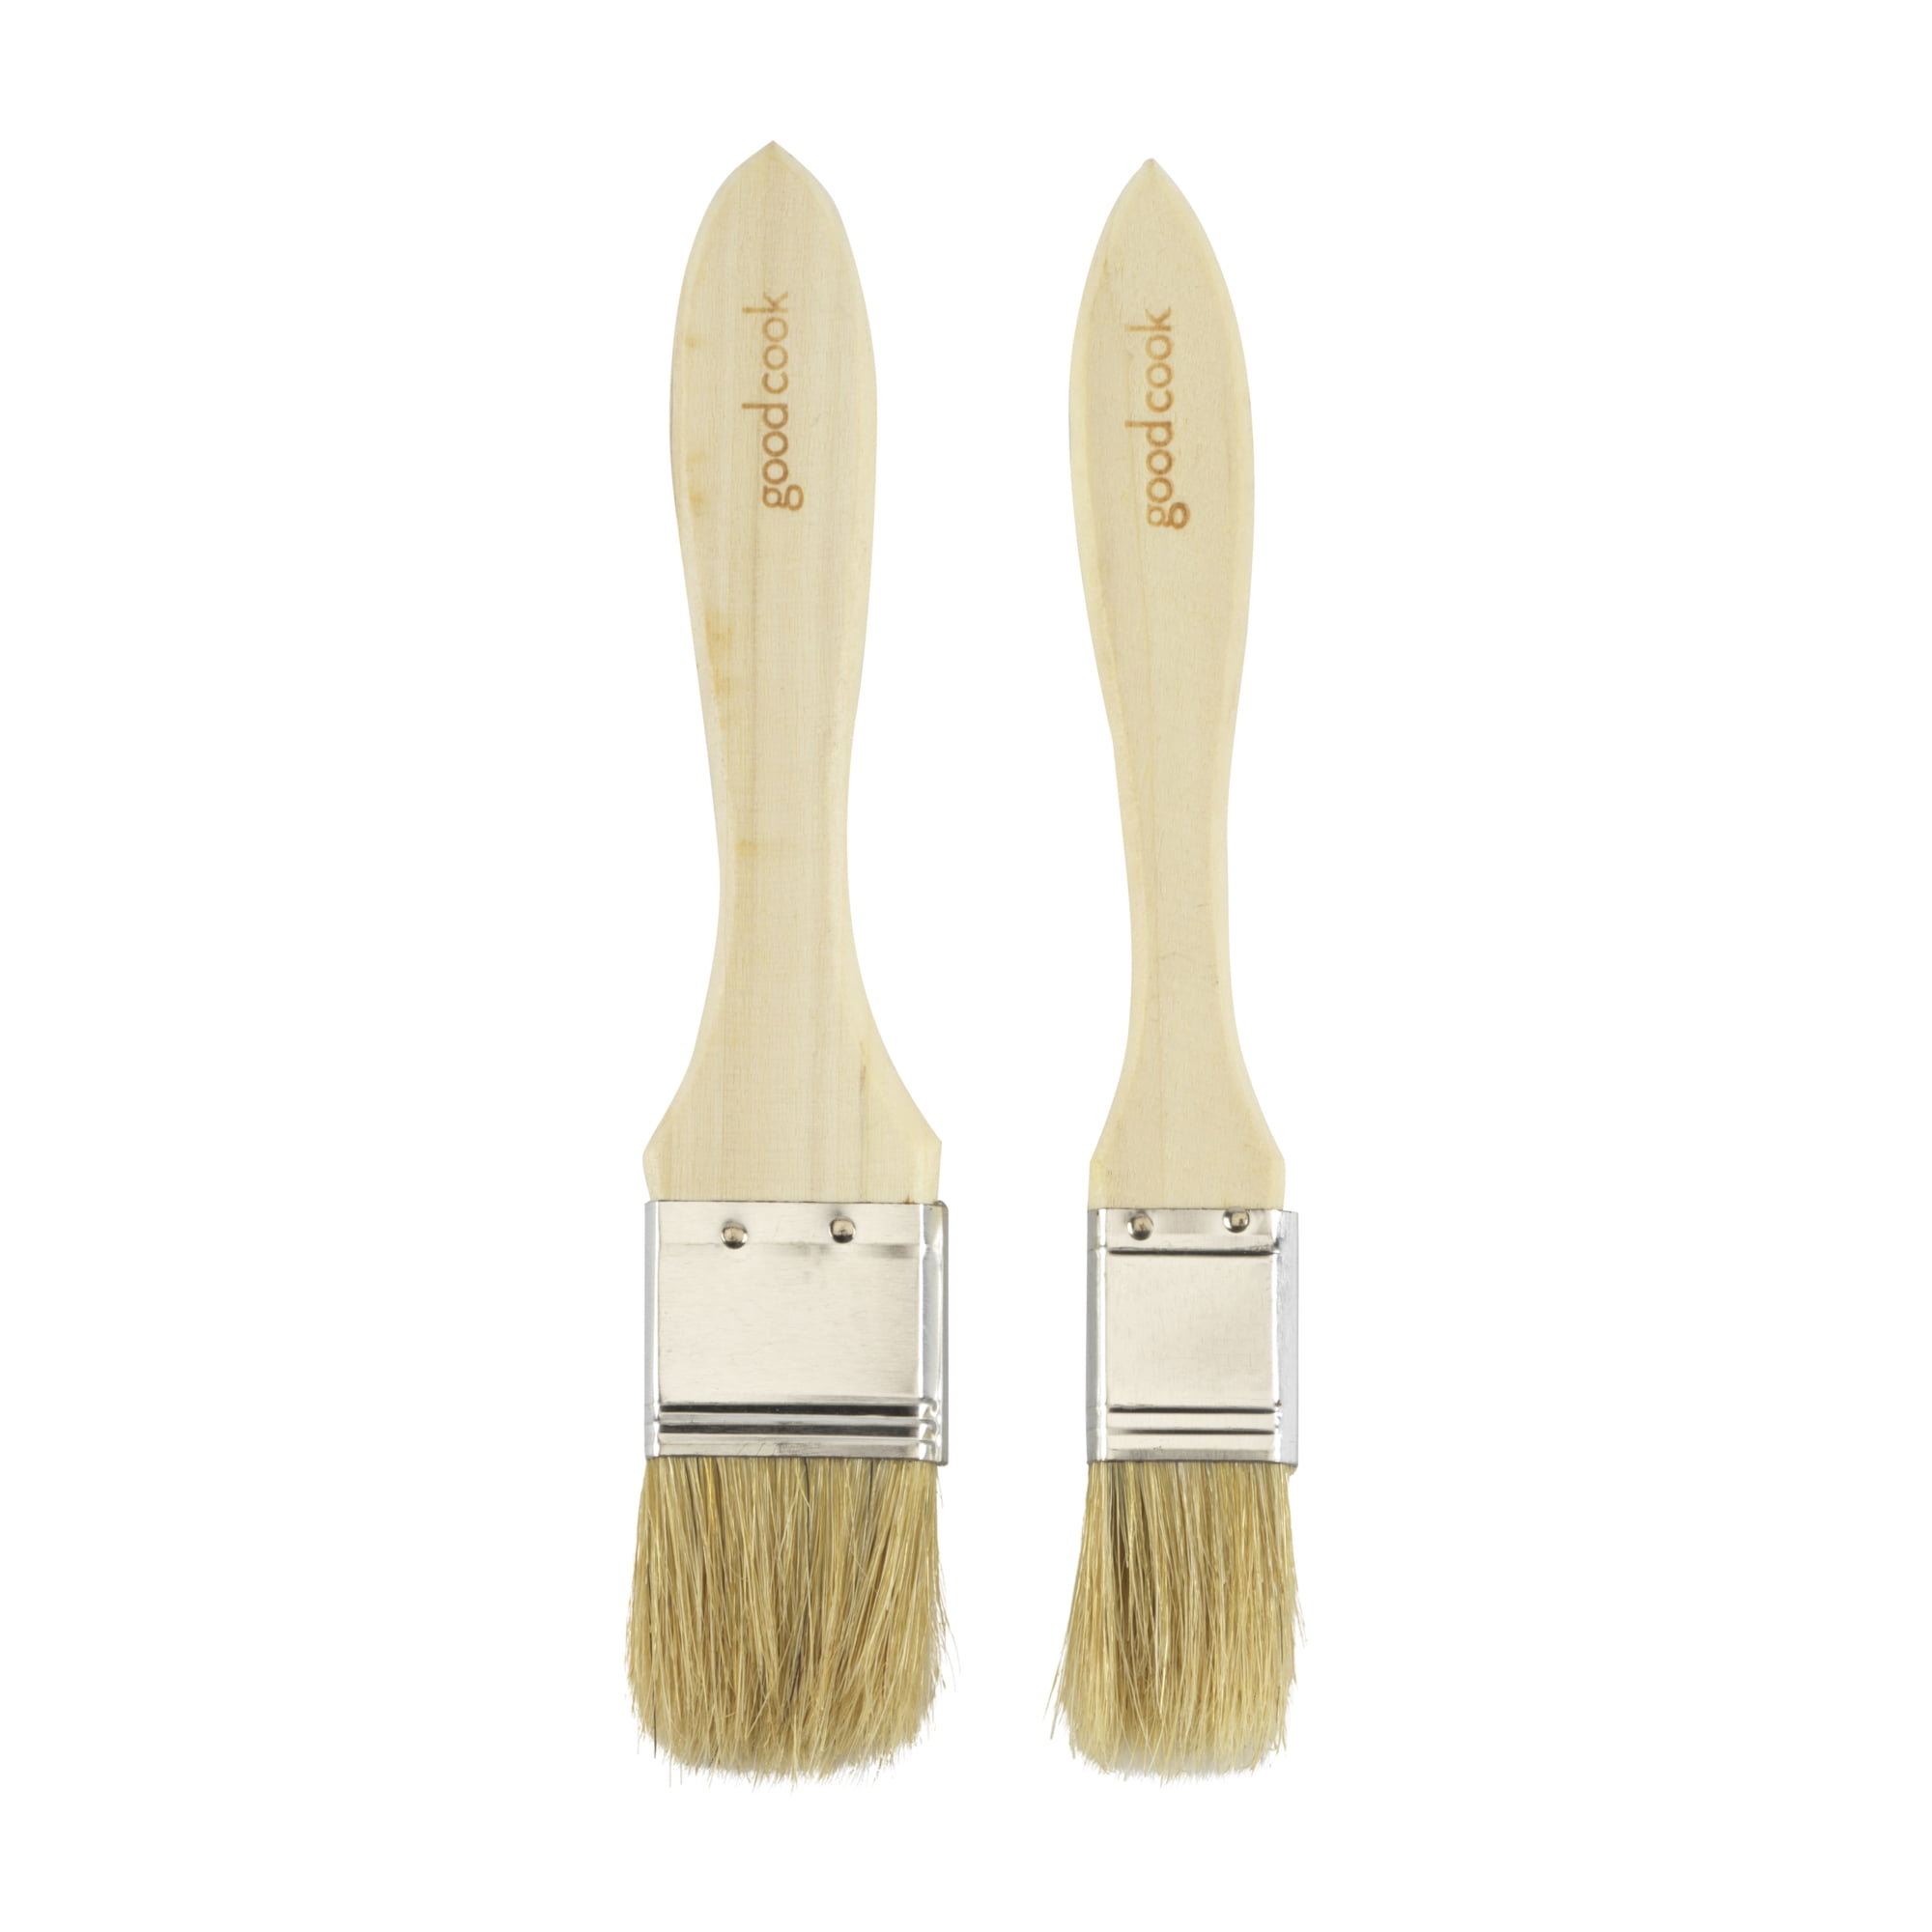 Goat Hair Bristle Pastry/Basting Brush with Wooden Handle